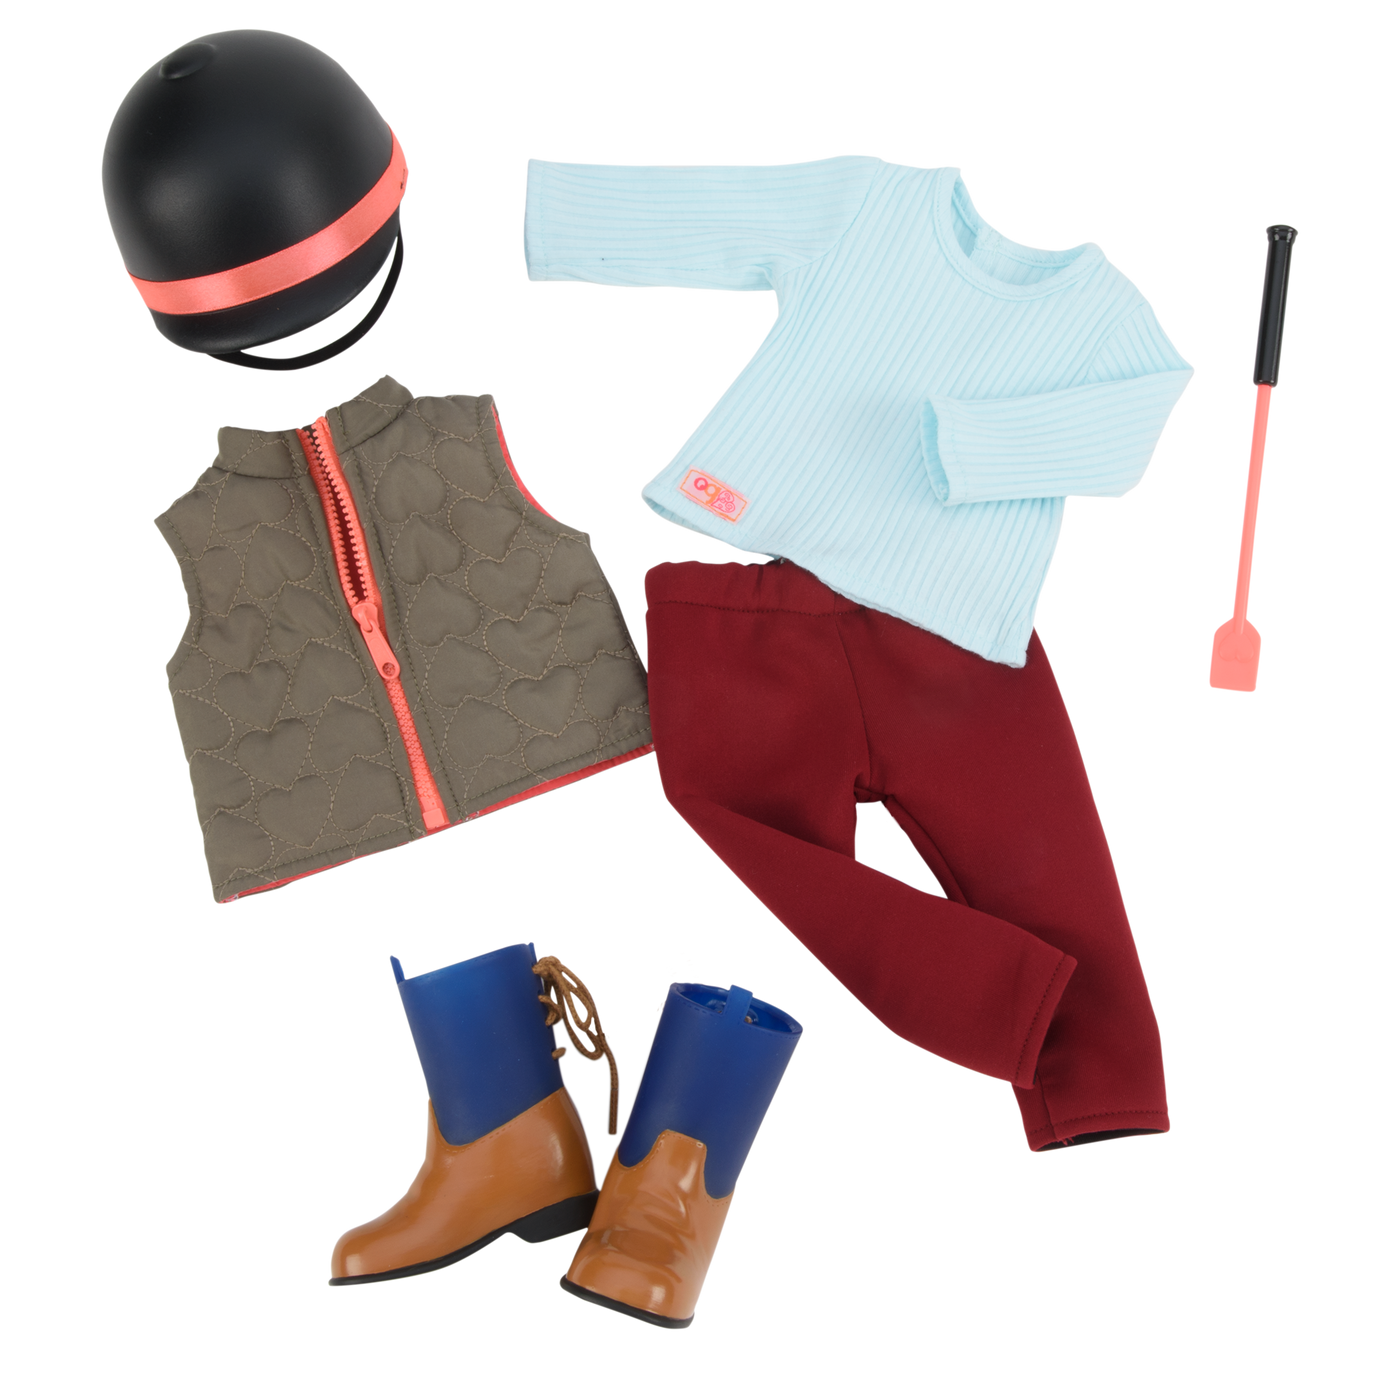 Well Groomed Horseback Riding Outfit for 18-inch Dolls